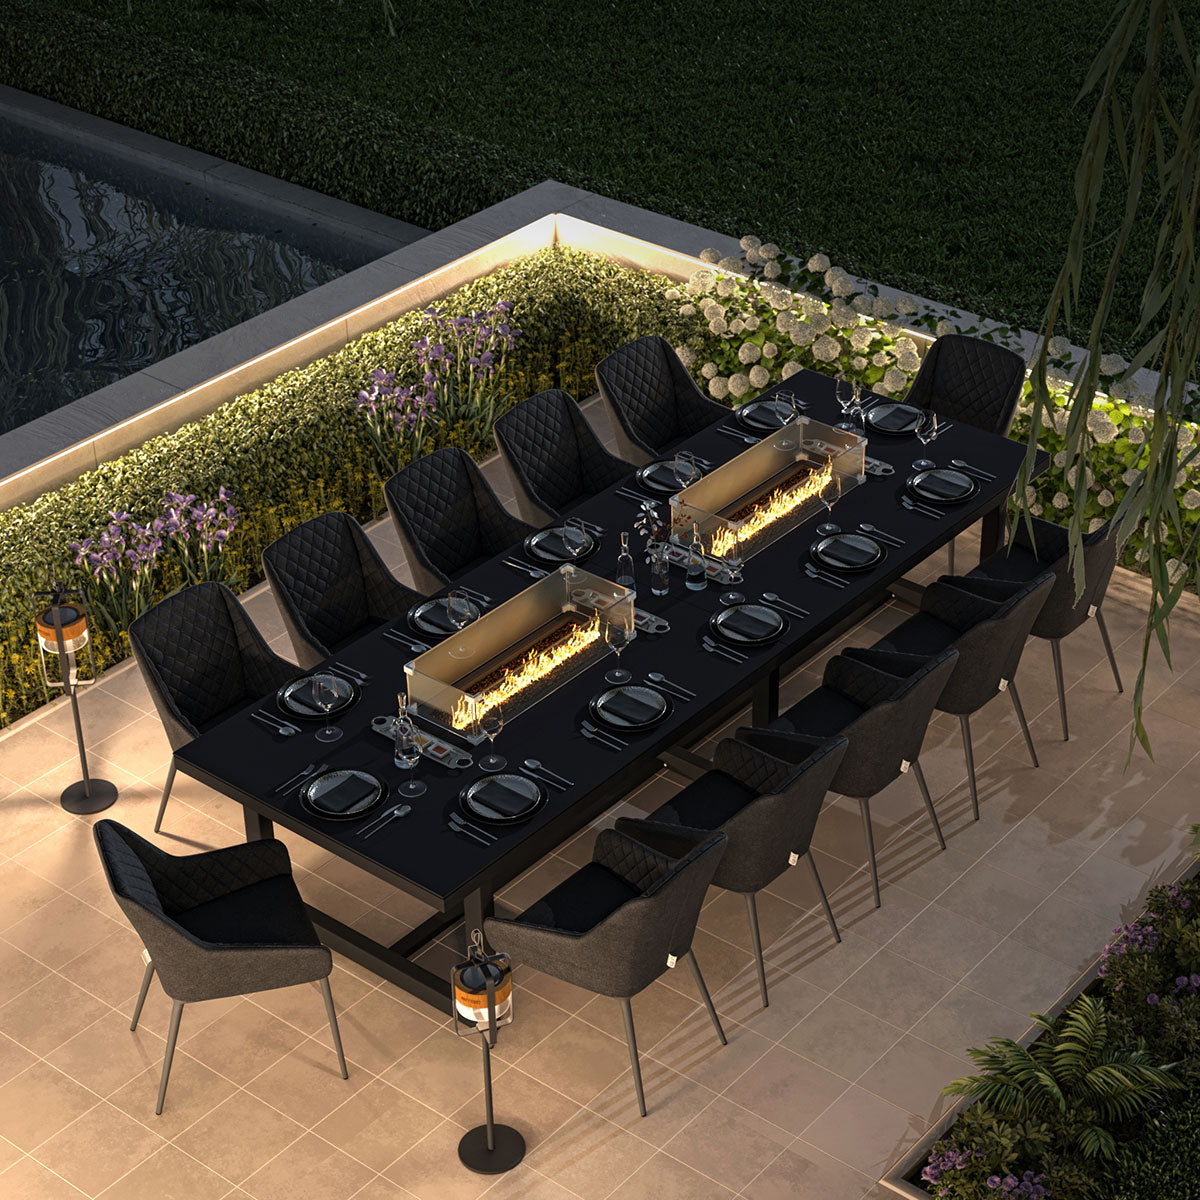 Maze - Outdoor Fabric Zest 12 Seat Rectangular Dining Set with Fire Pit Table - Charcoal